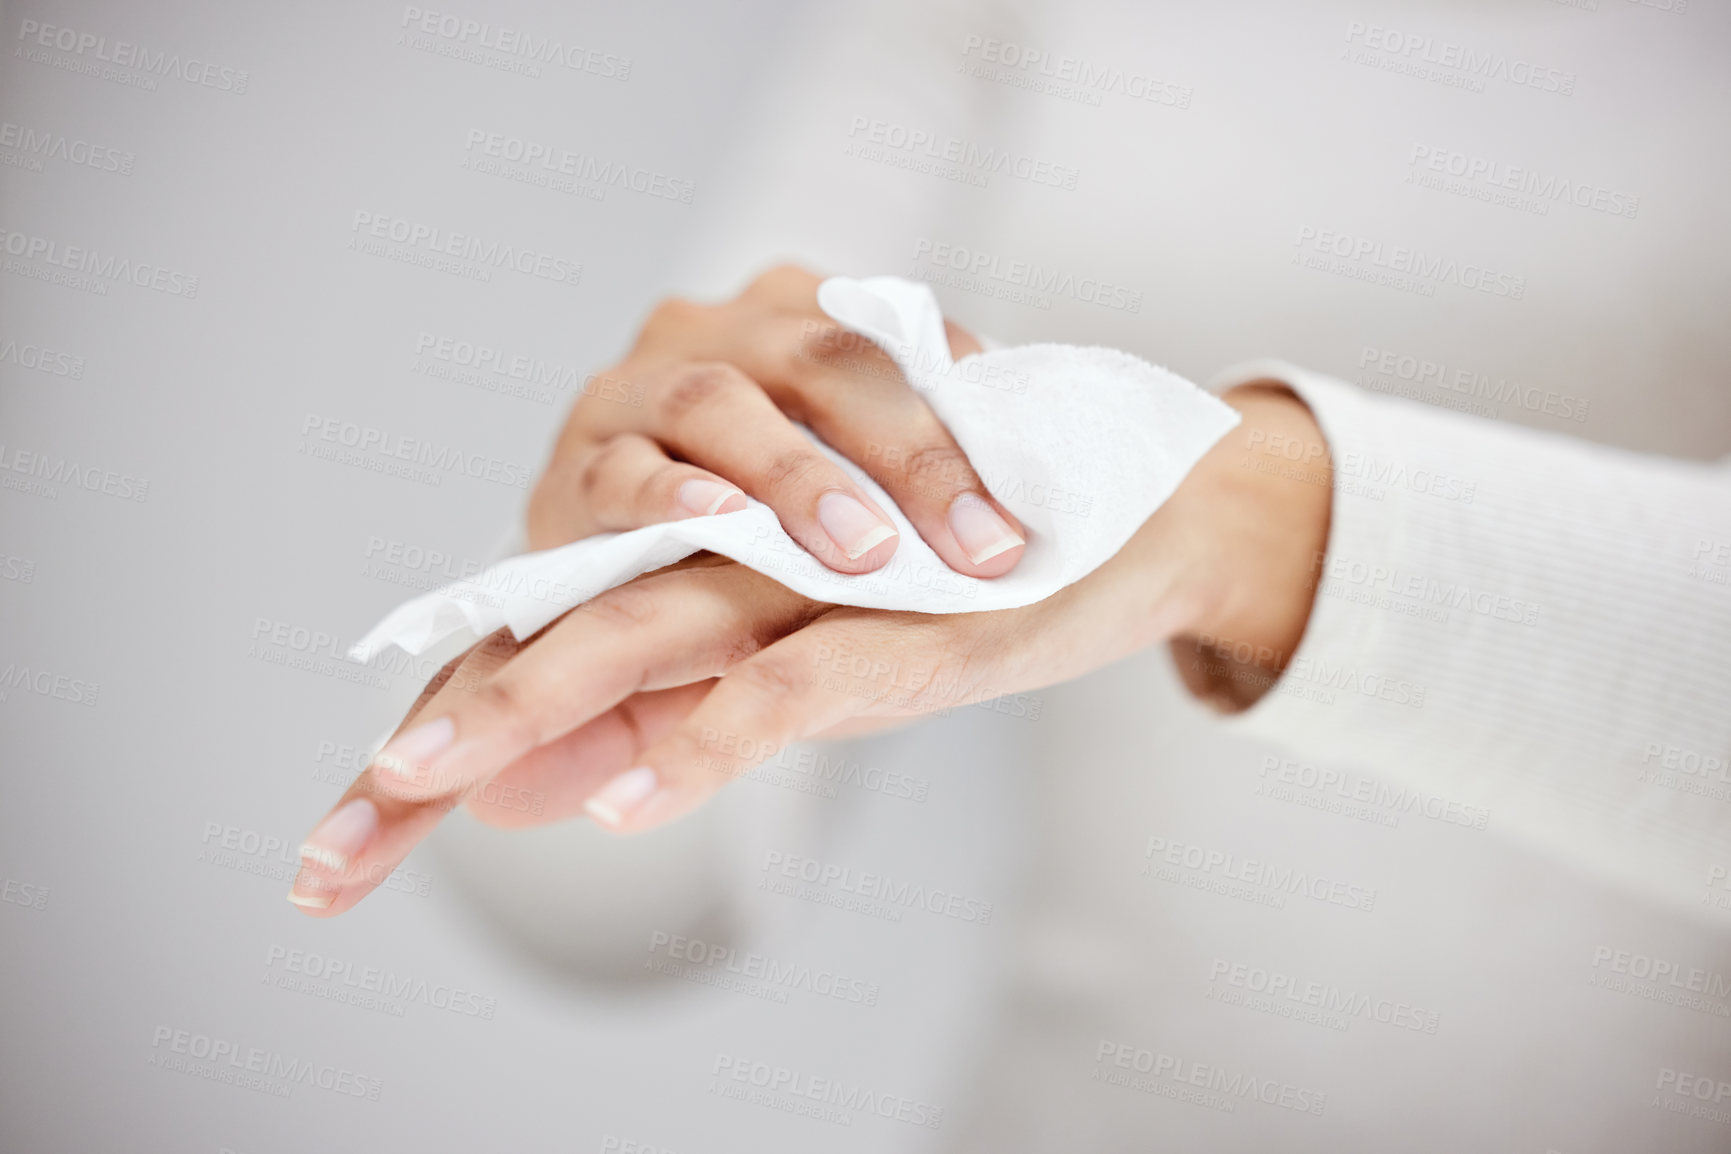 Buy stock photo Shot of an unrecognizable person using a wipe to clean their hands